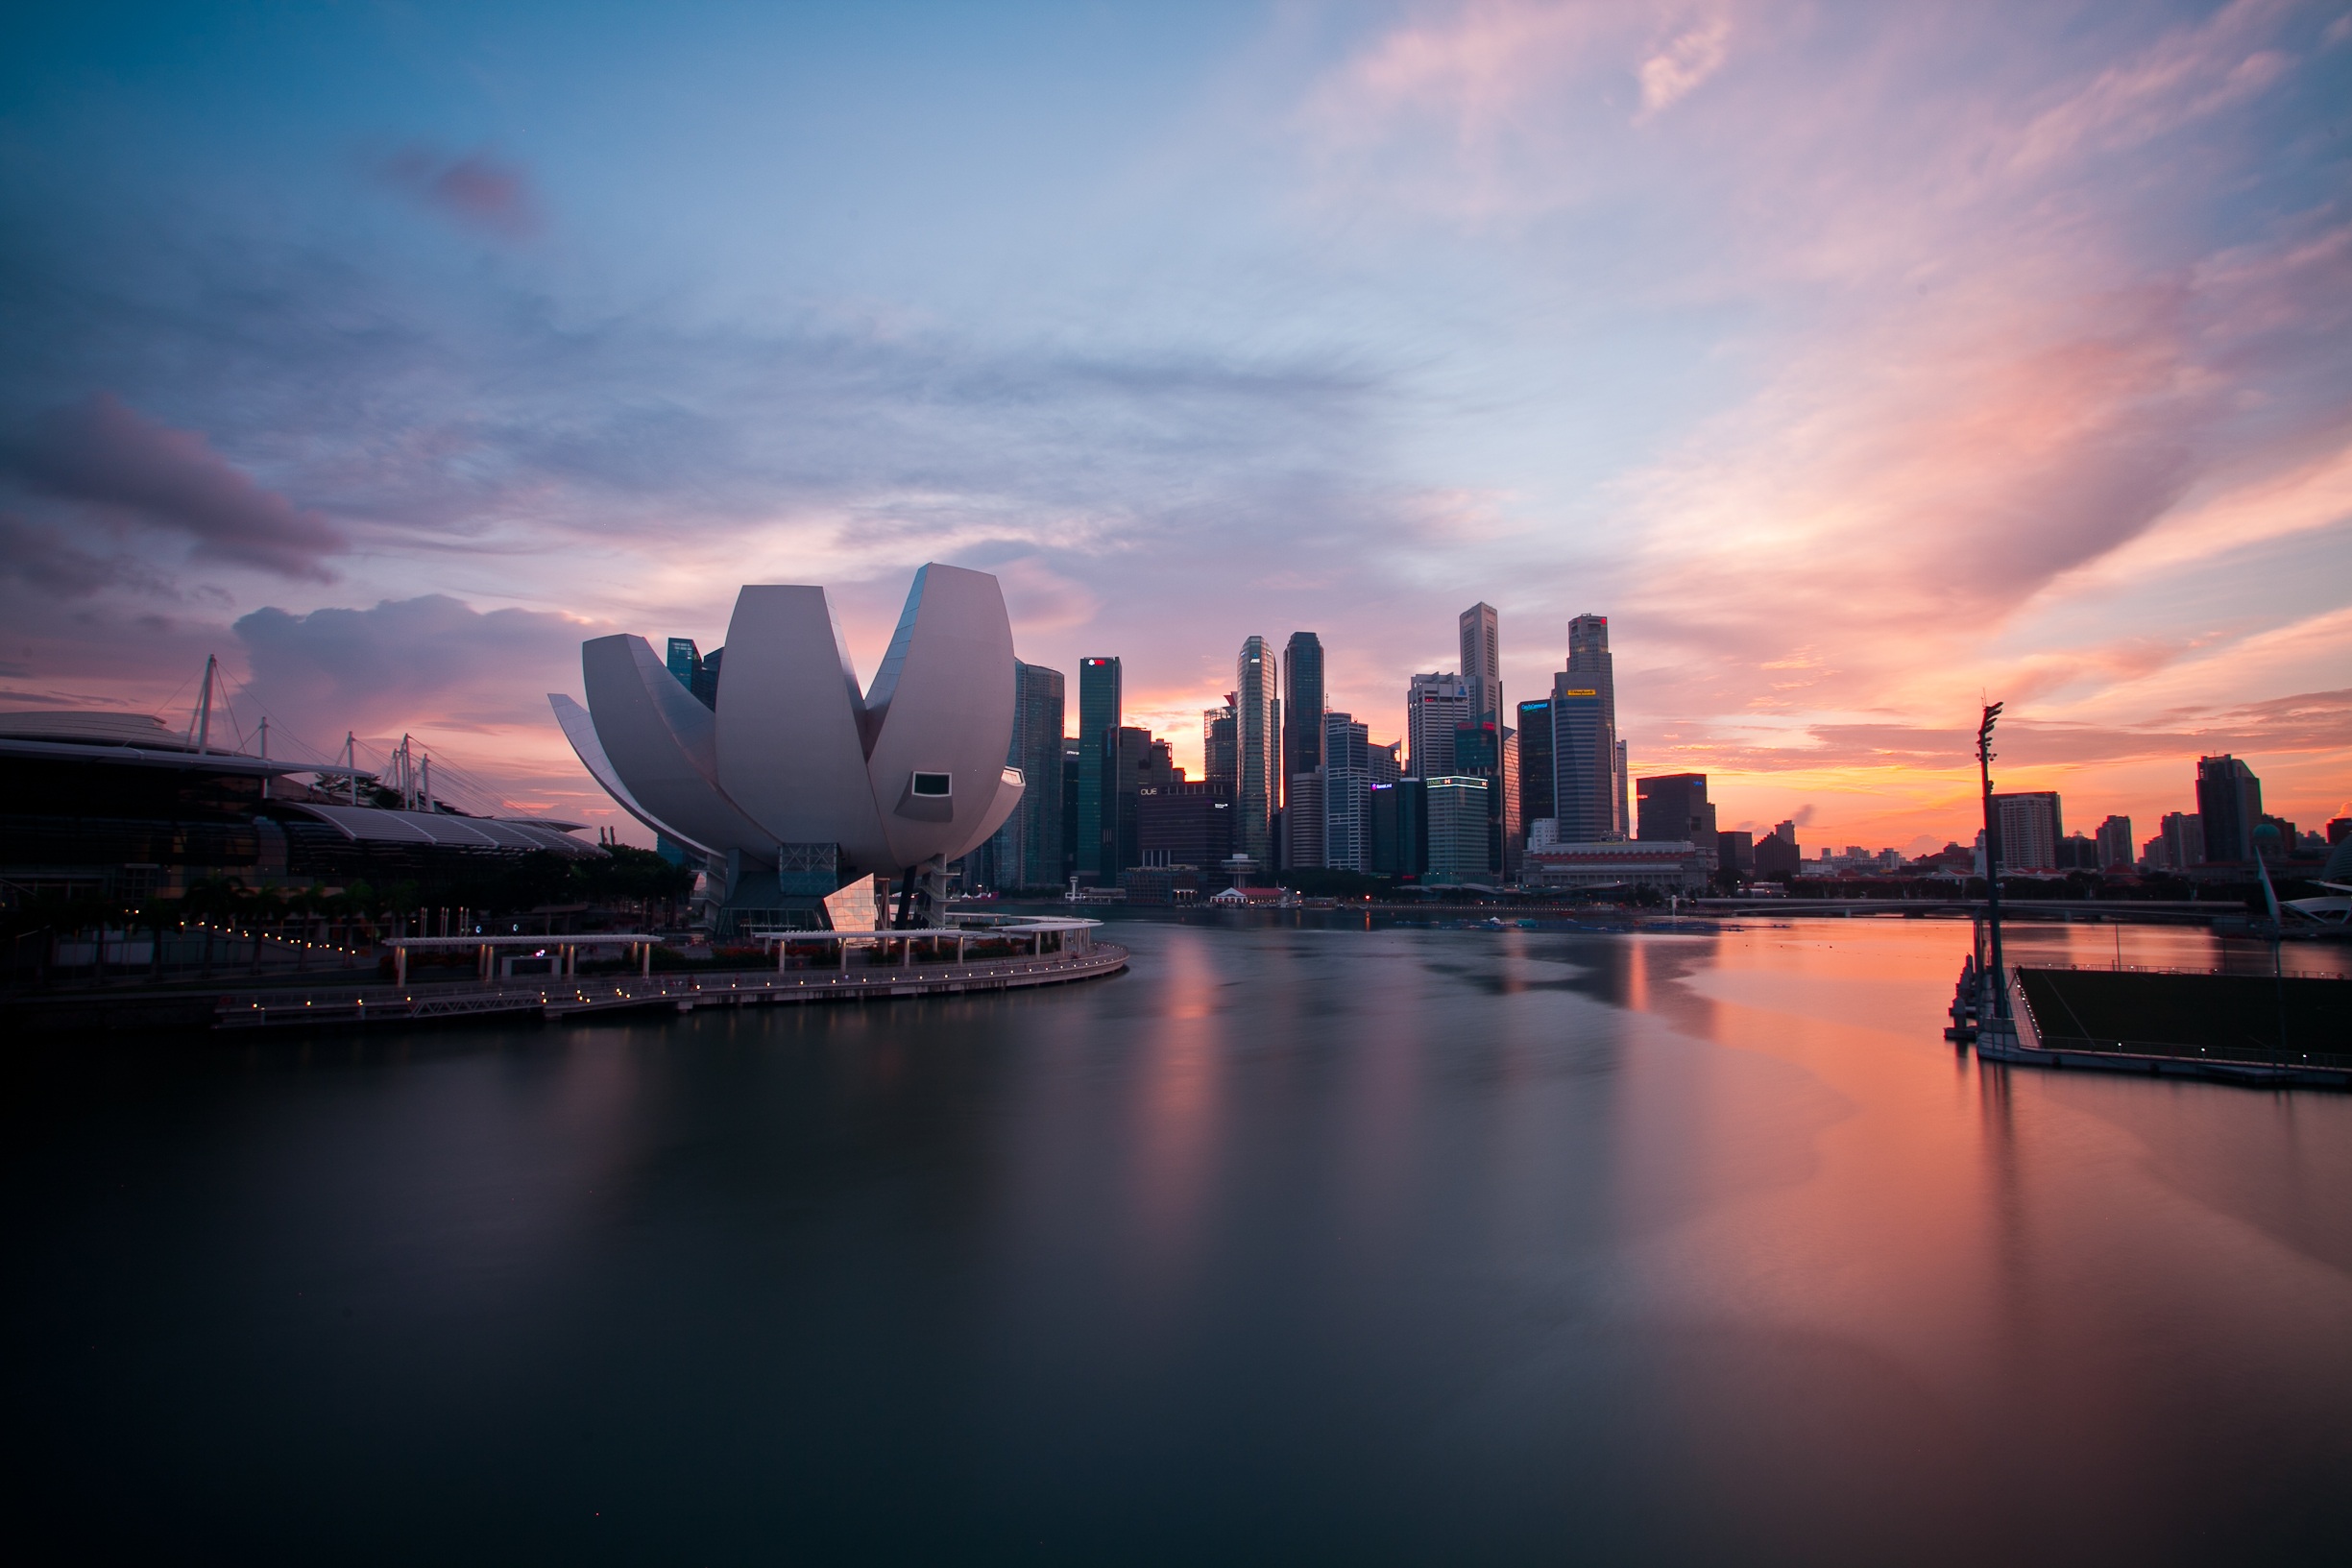 Up the Creek with a Paddle: Building Modern Singapore